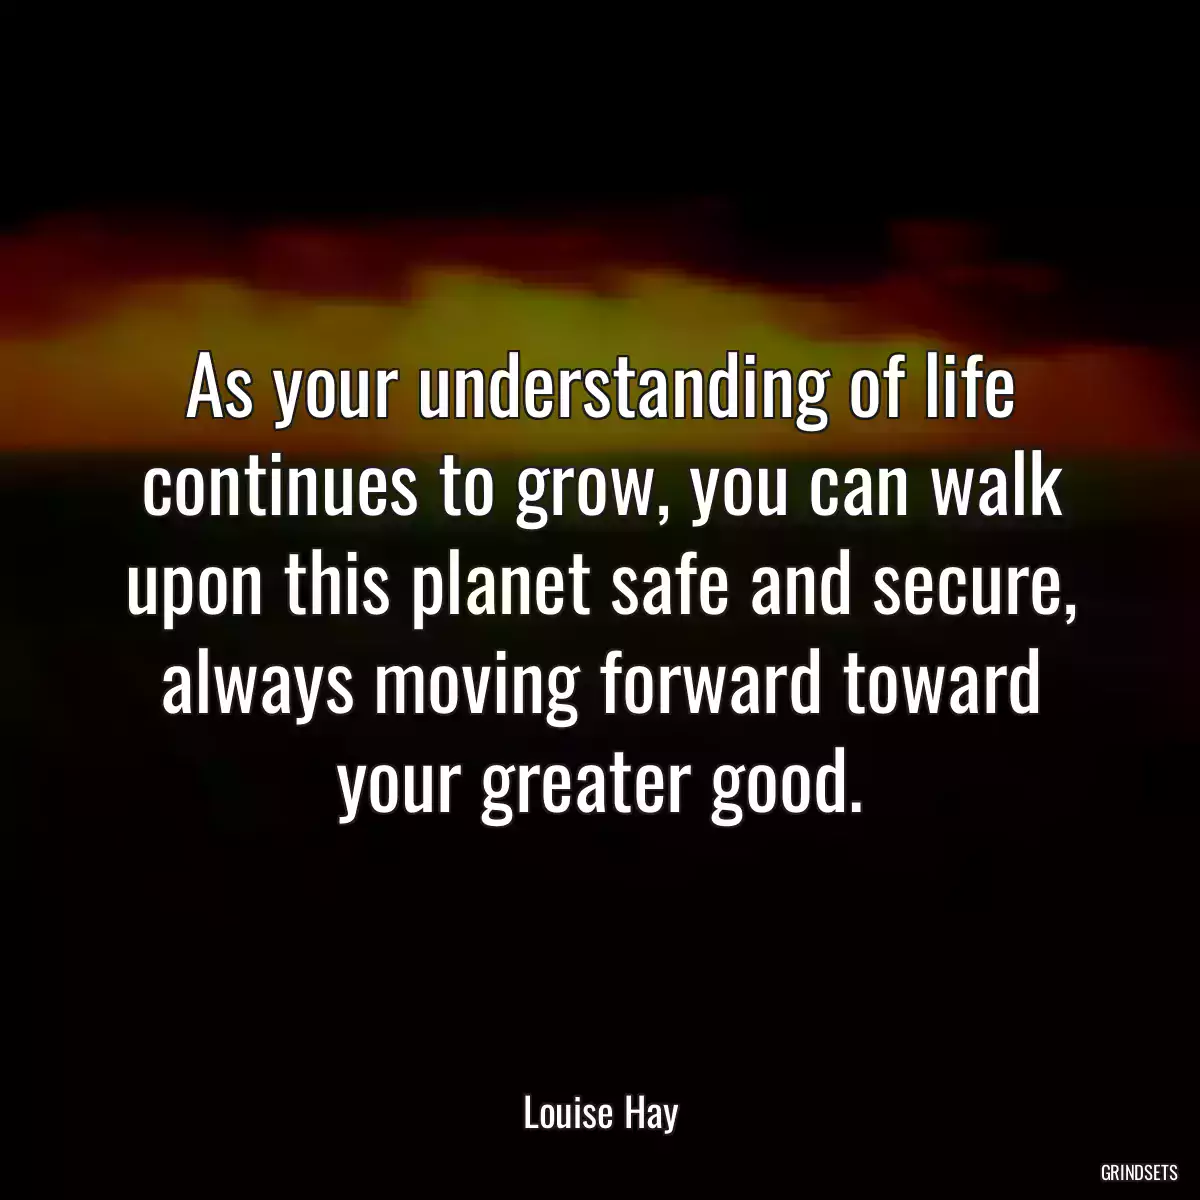 As your understanding of life continues to grow, you can walk upon this planet safe and secure, always moving forward toward your greater good.